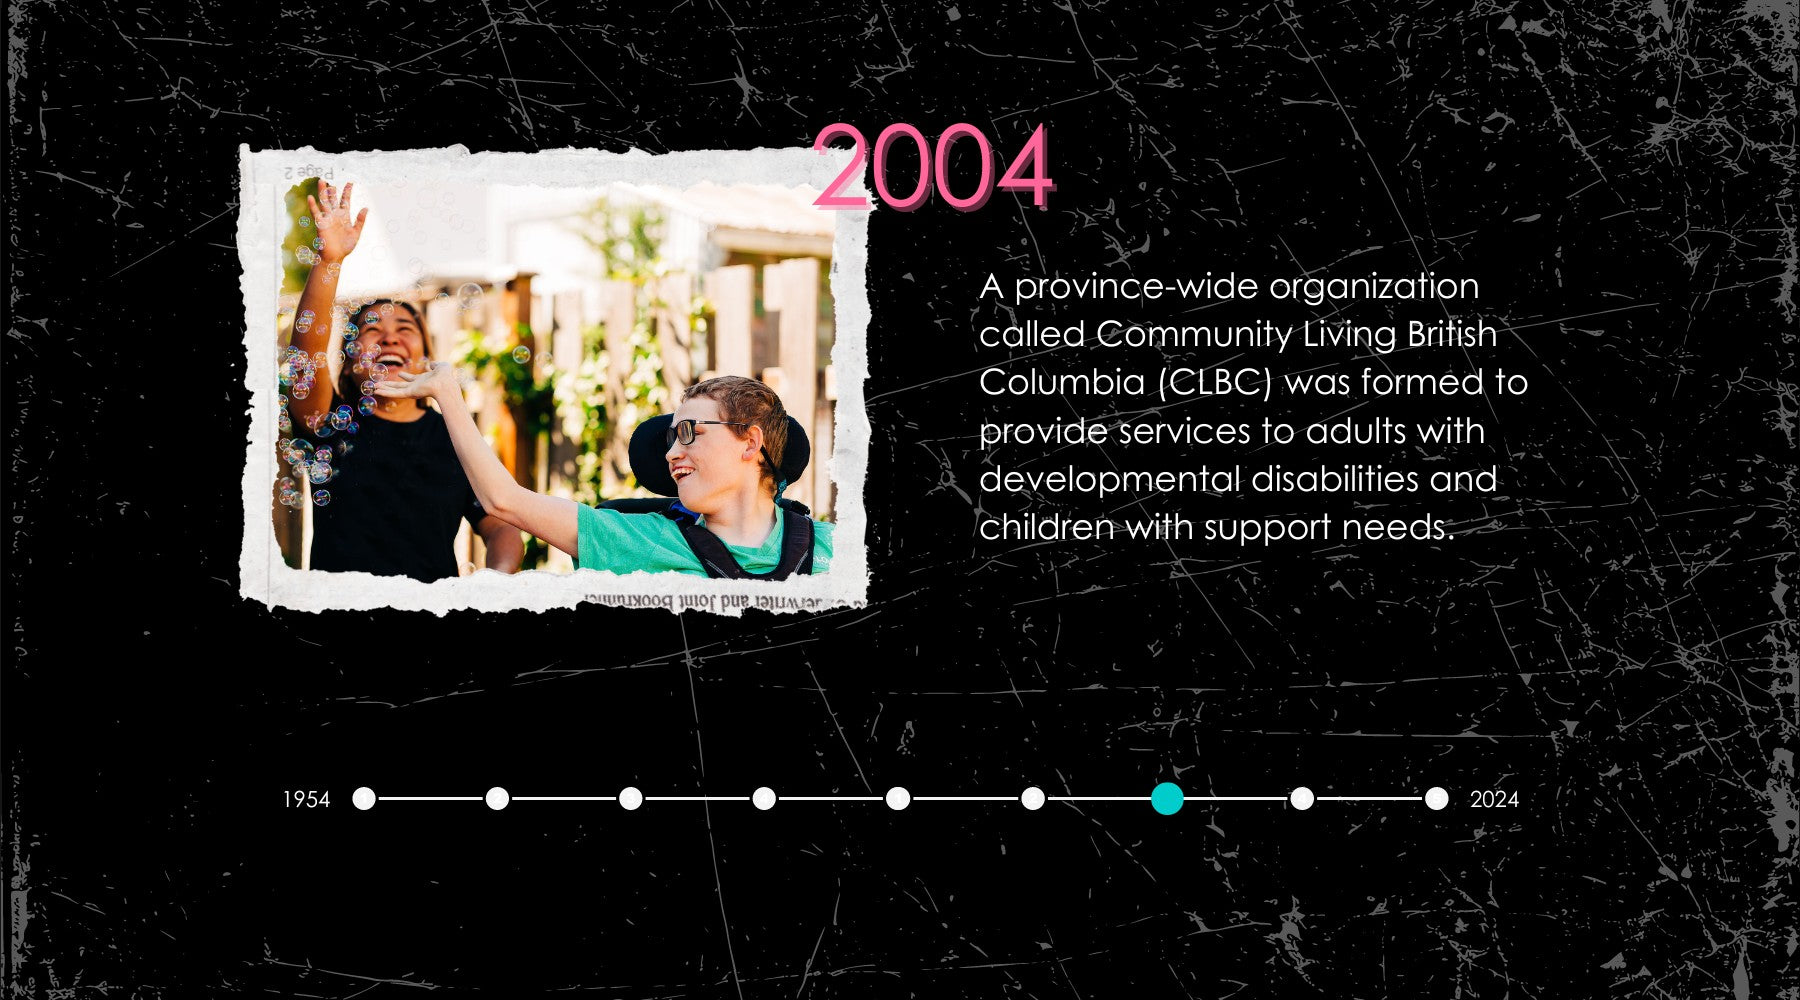 2004 timeline image young man with intellectual disabilities blowing bubbles with his support worker